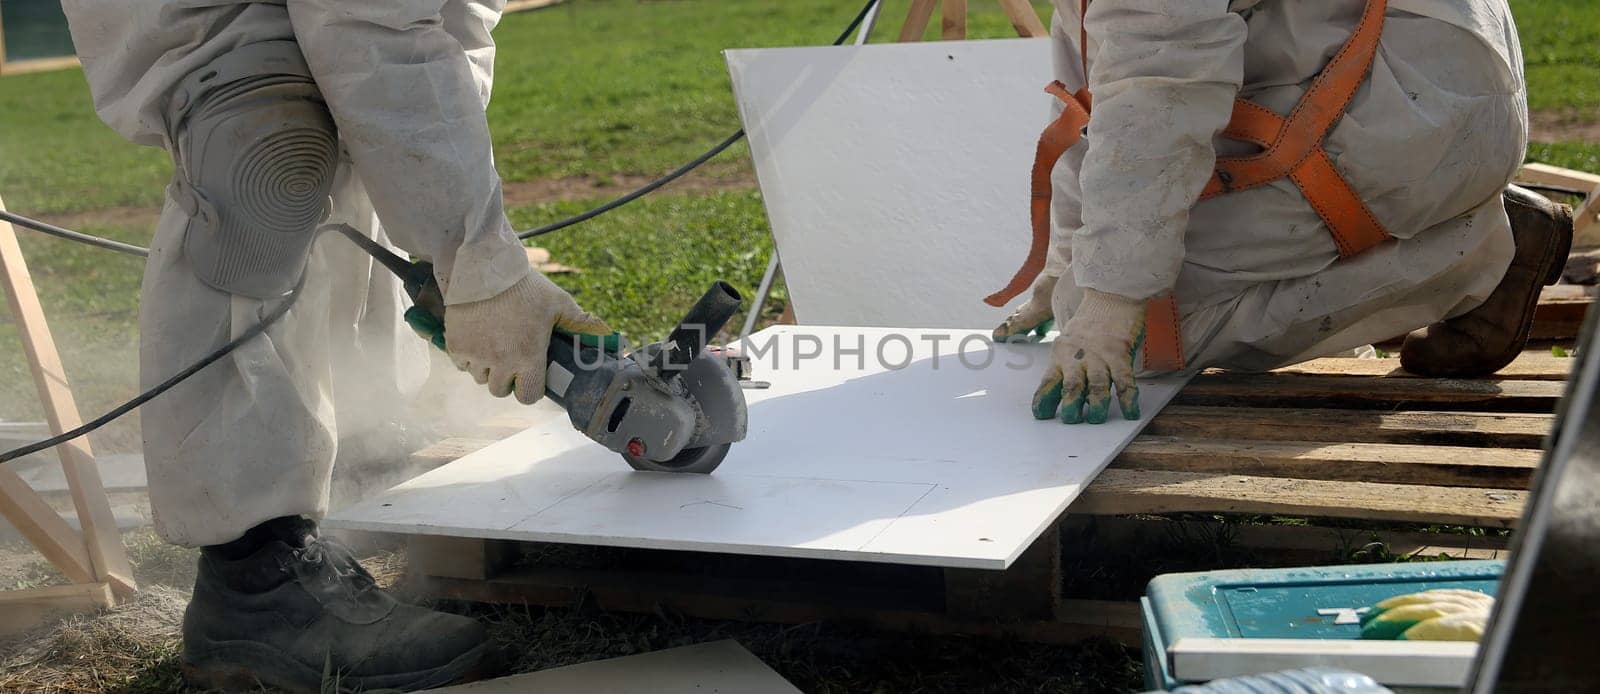 A construction worker in white overalls cuts a white panel with a grinder on a wooden pallet. The worker is wearing safety gloves and a harness.